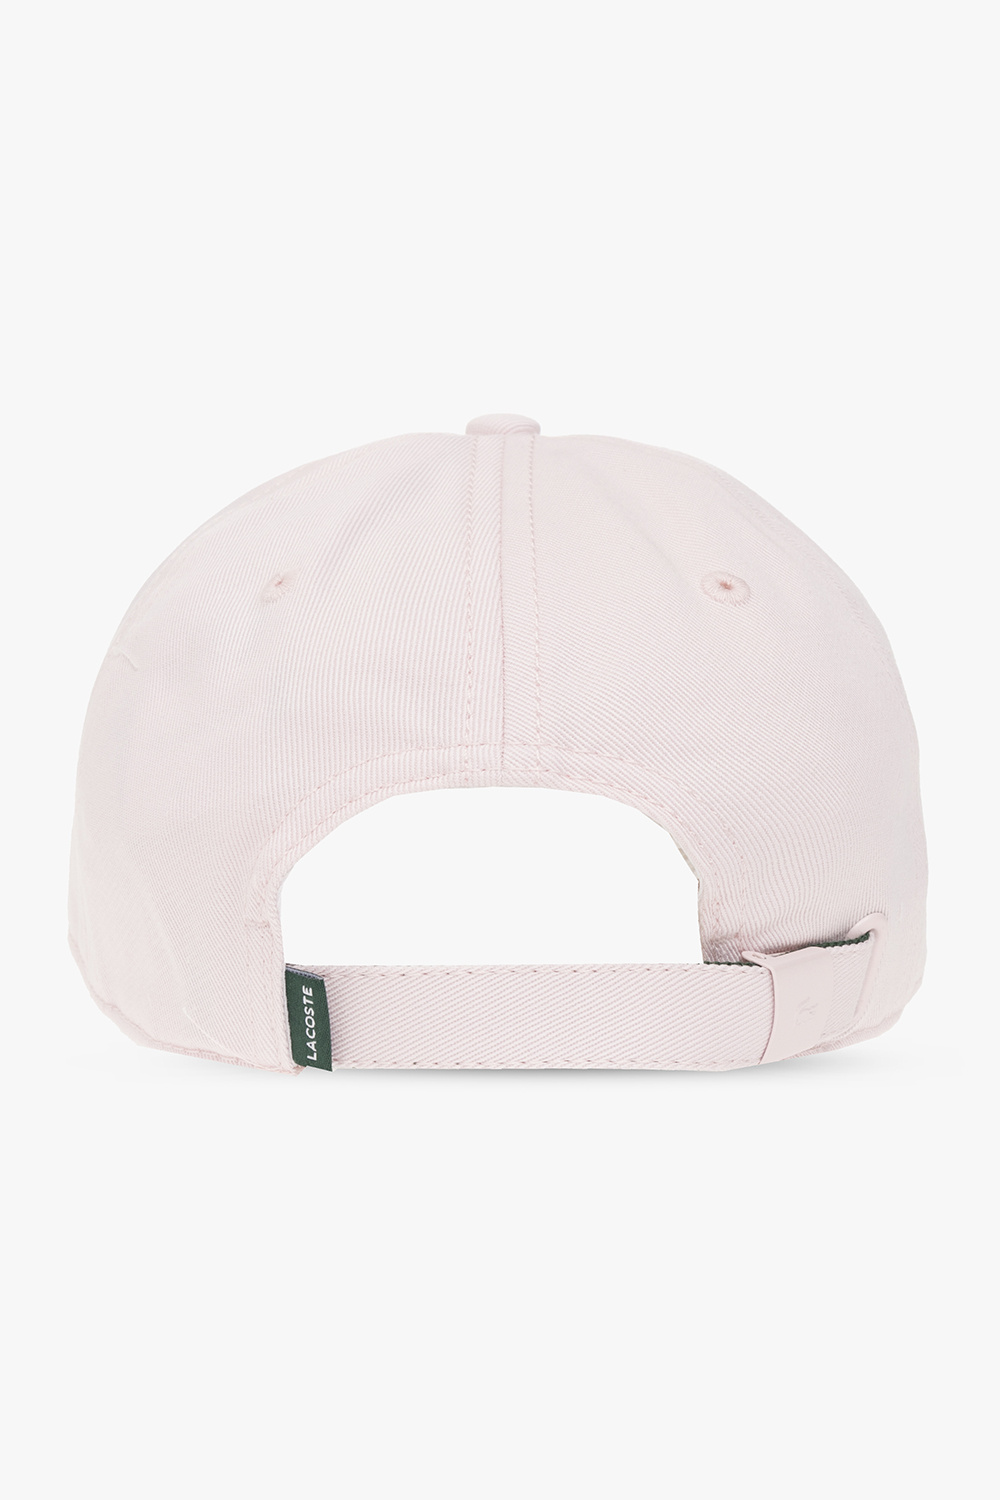 Serve a Lacoste Cap - and logo with Serve on atmos Pink IetpShops with - Lacoste collaborated collection Japan new